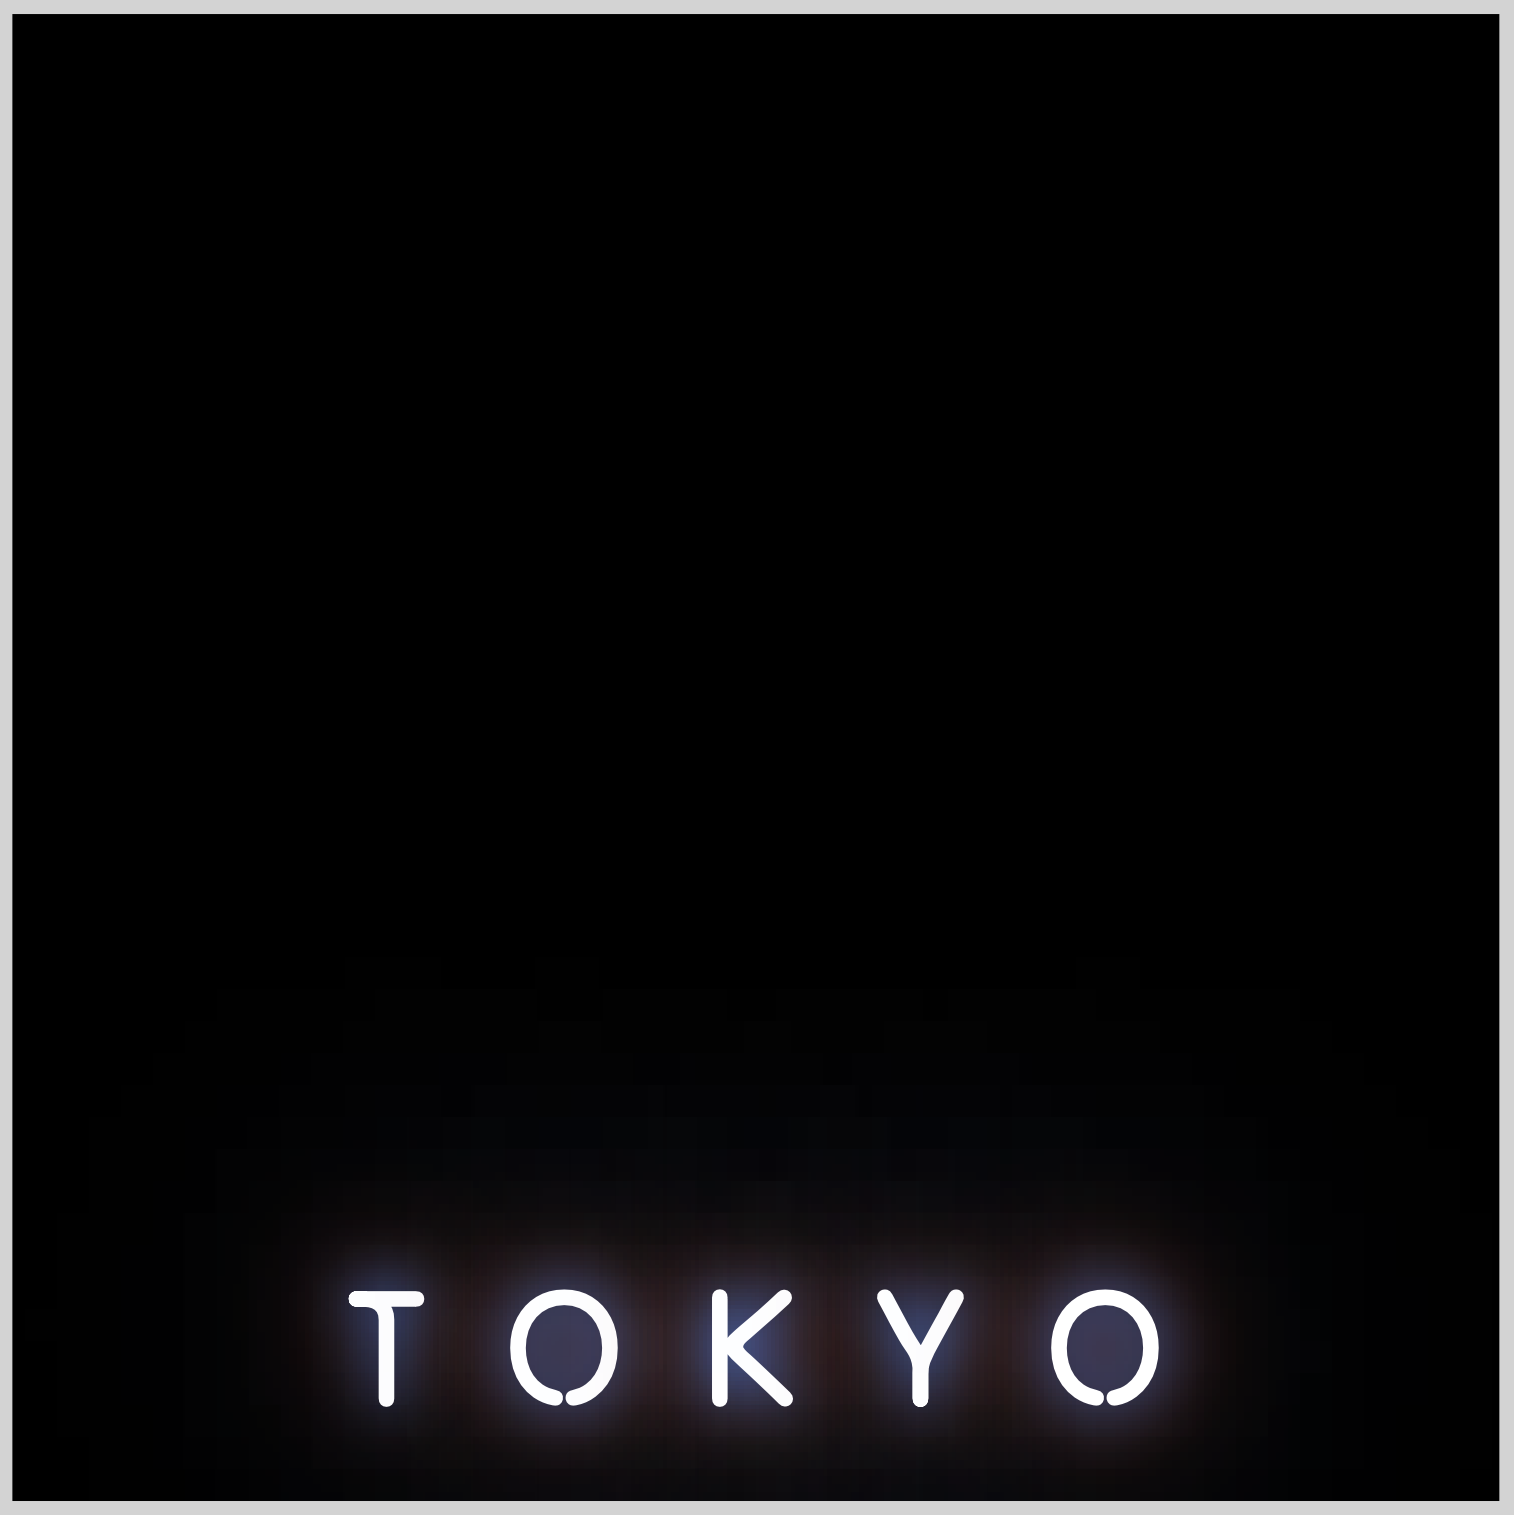 CSS Animation – Tokyo Tower Neon Sign